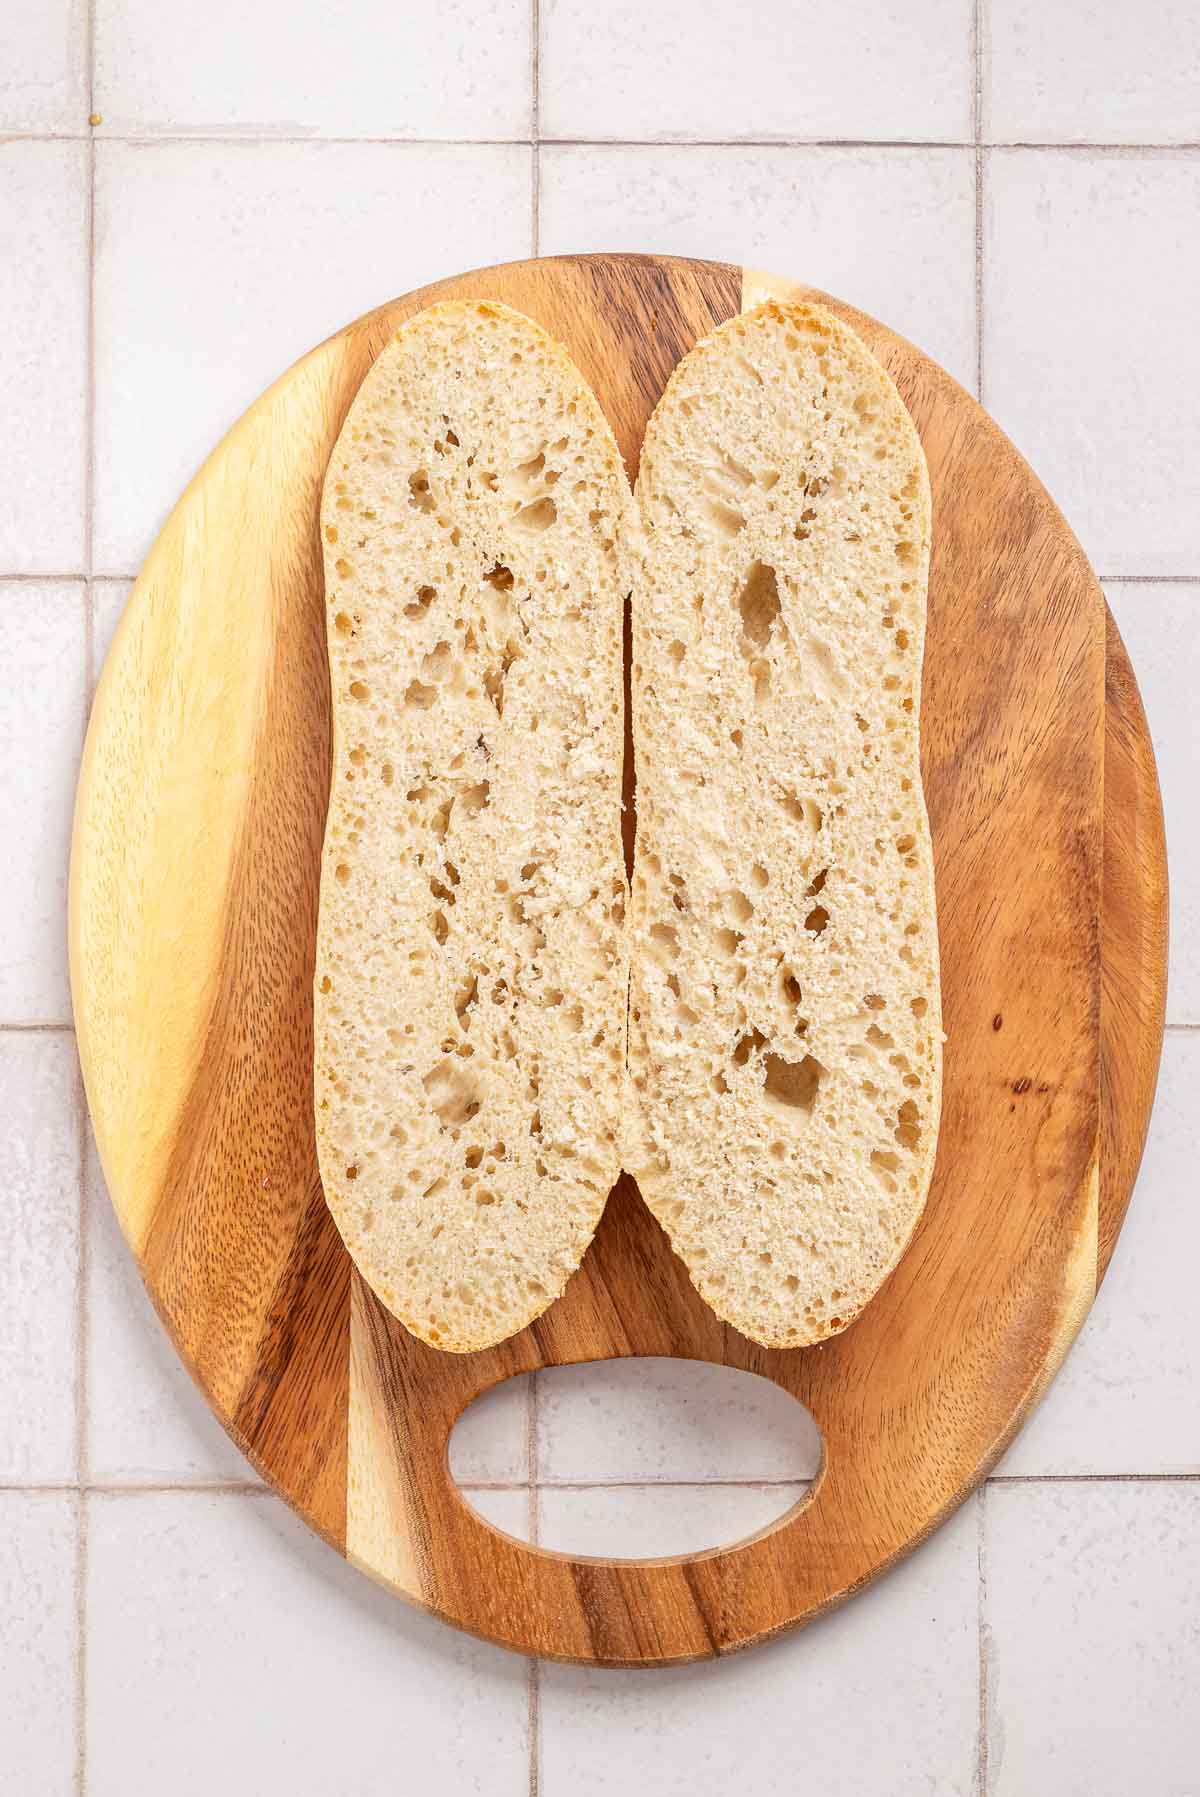 Two slices of bread on a wooden cutting board.